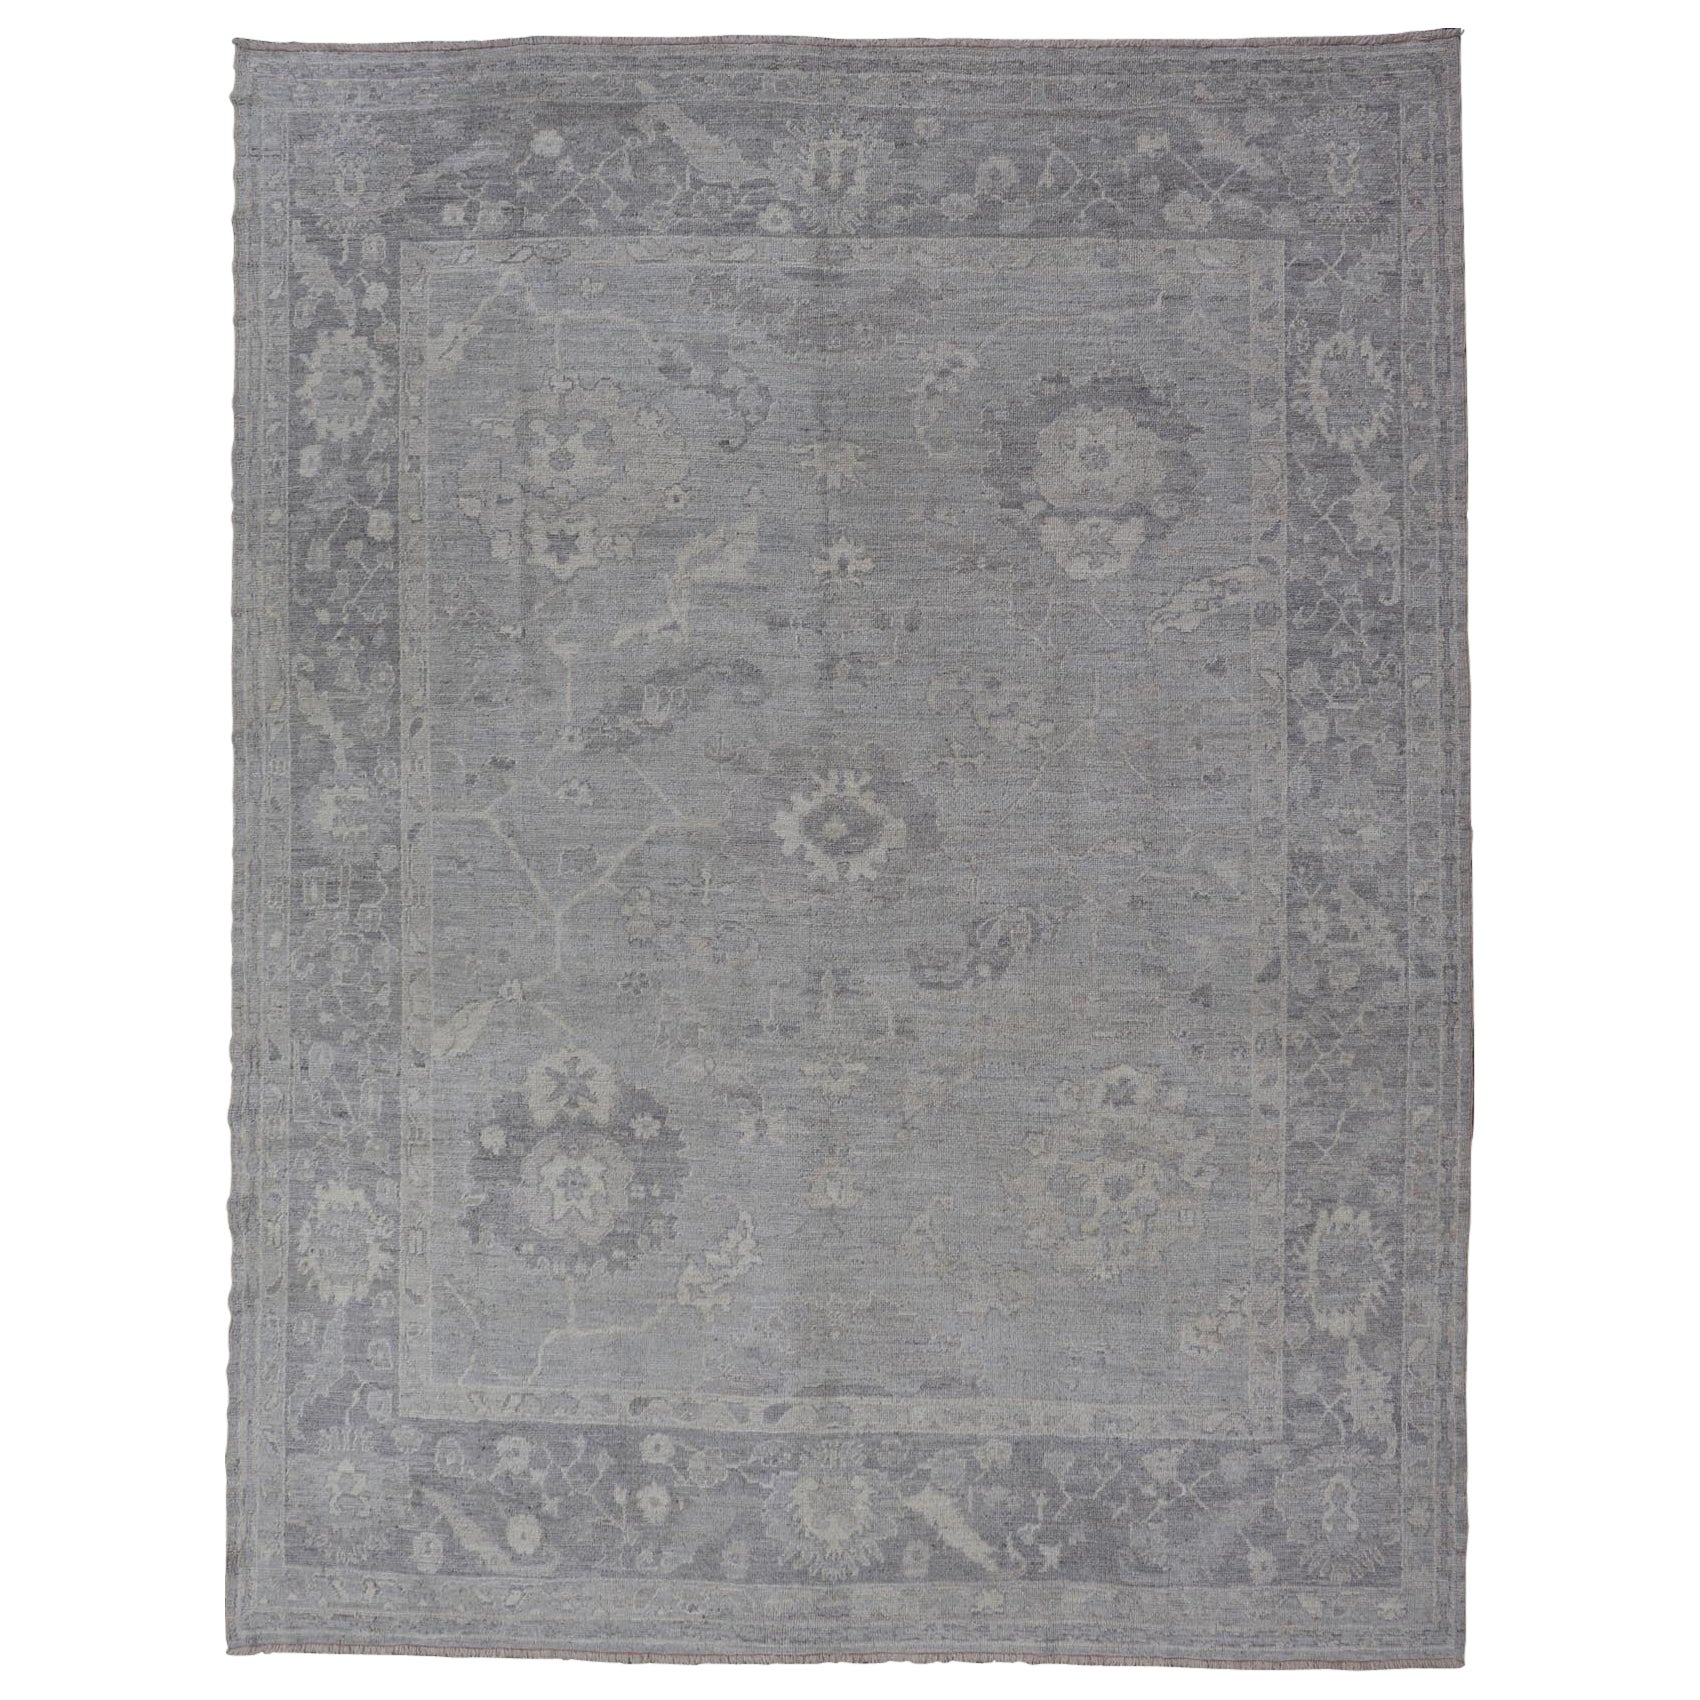 Large Hand Knotted Turkish Oushak with Floral Motifs in Gray, Taupe & Lavender